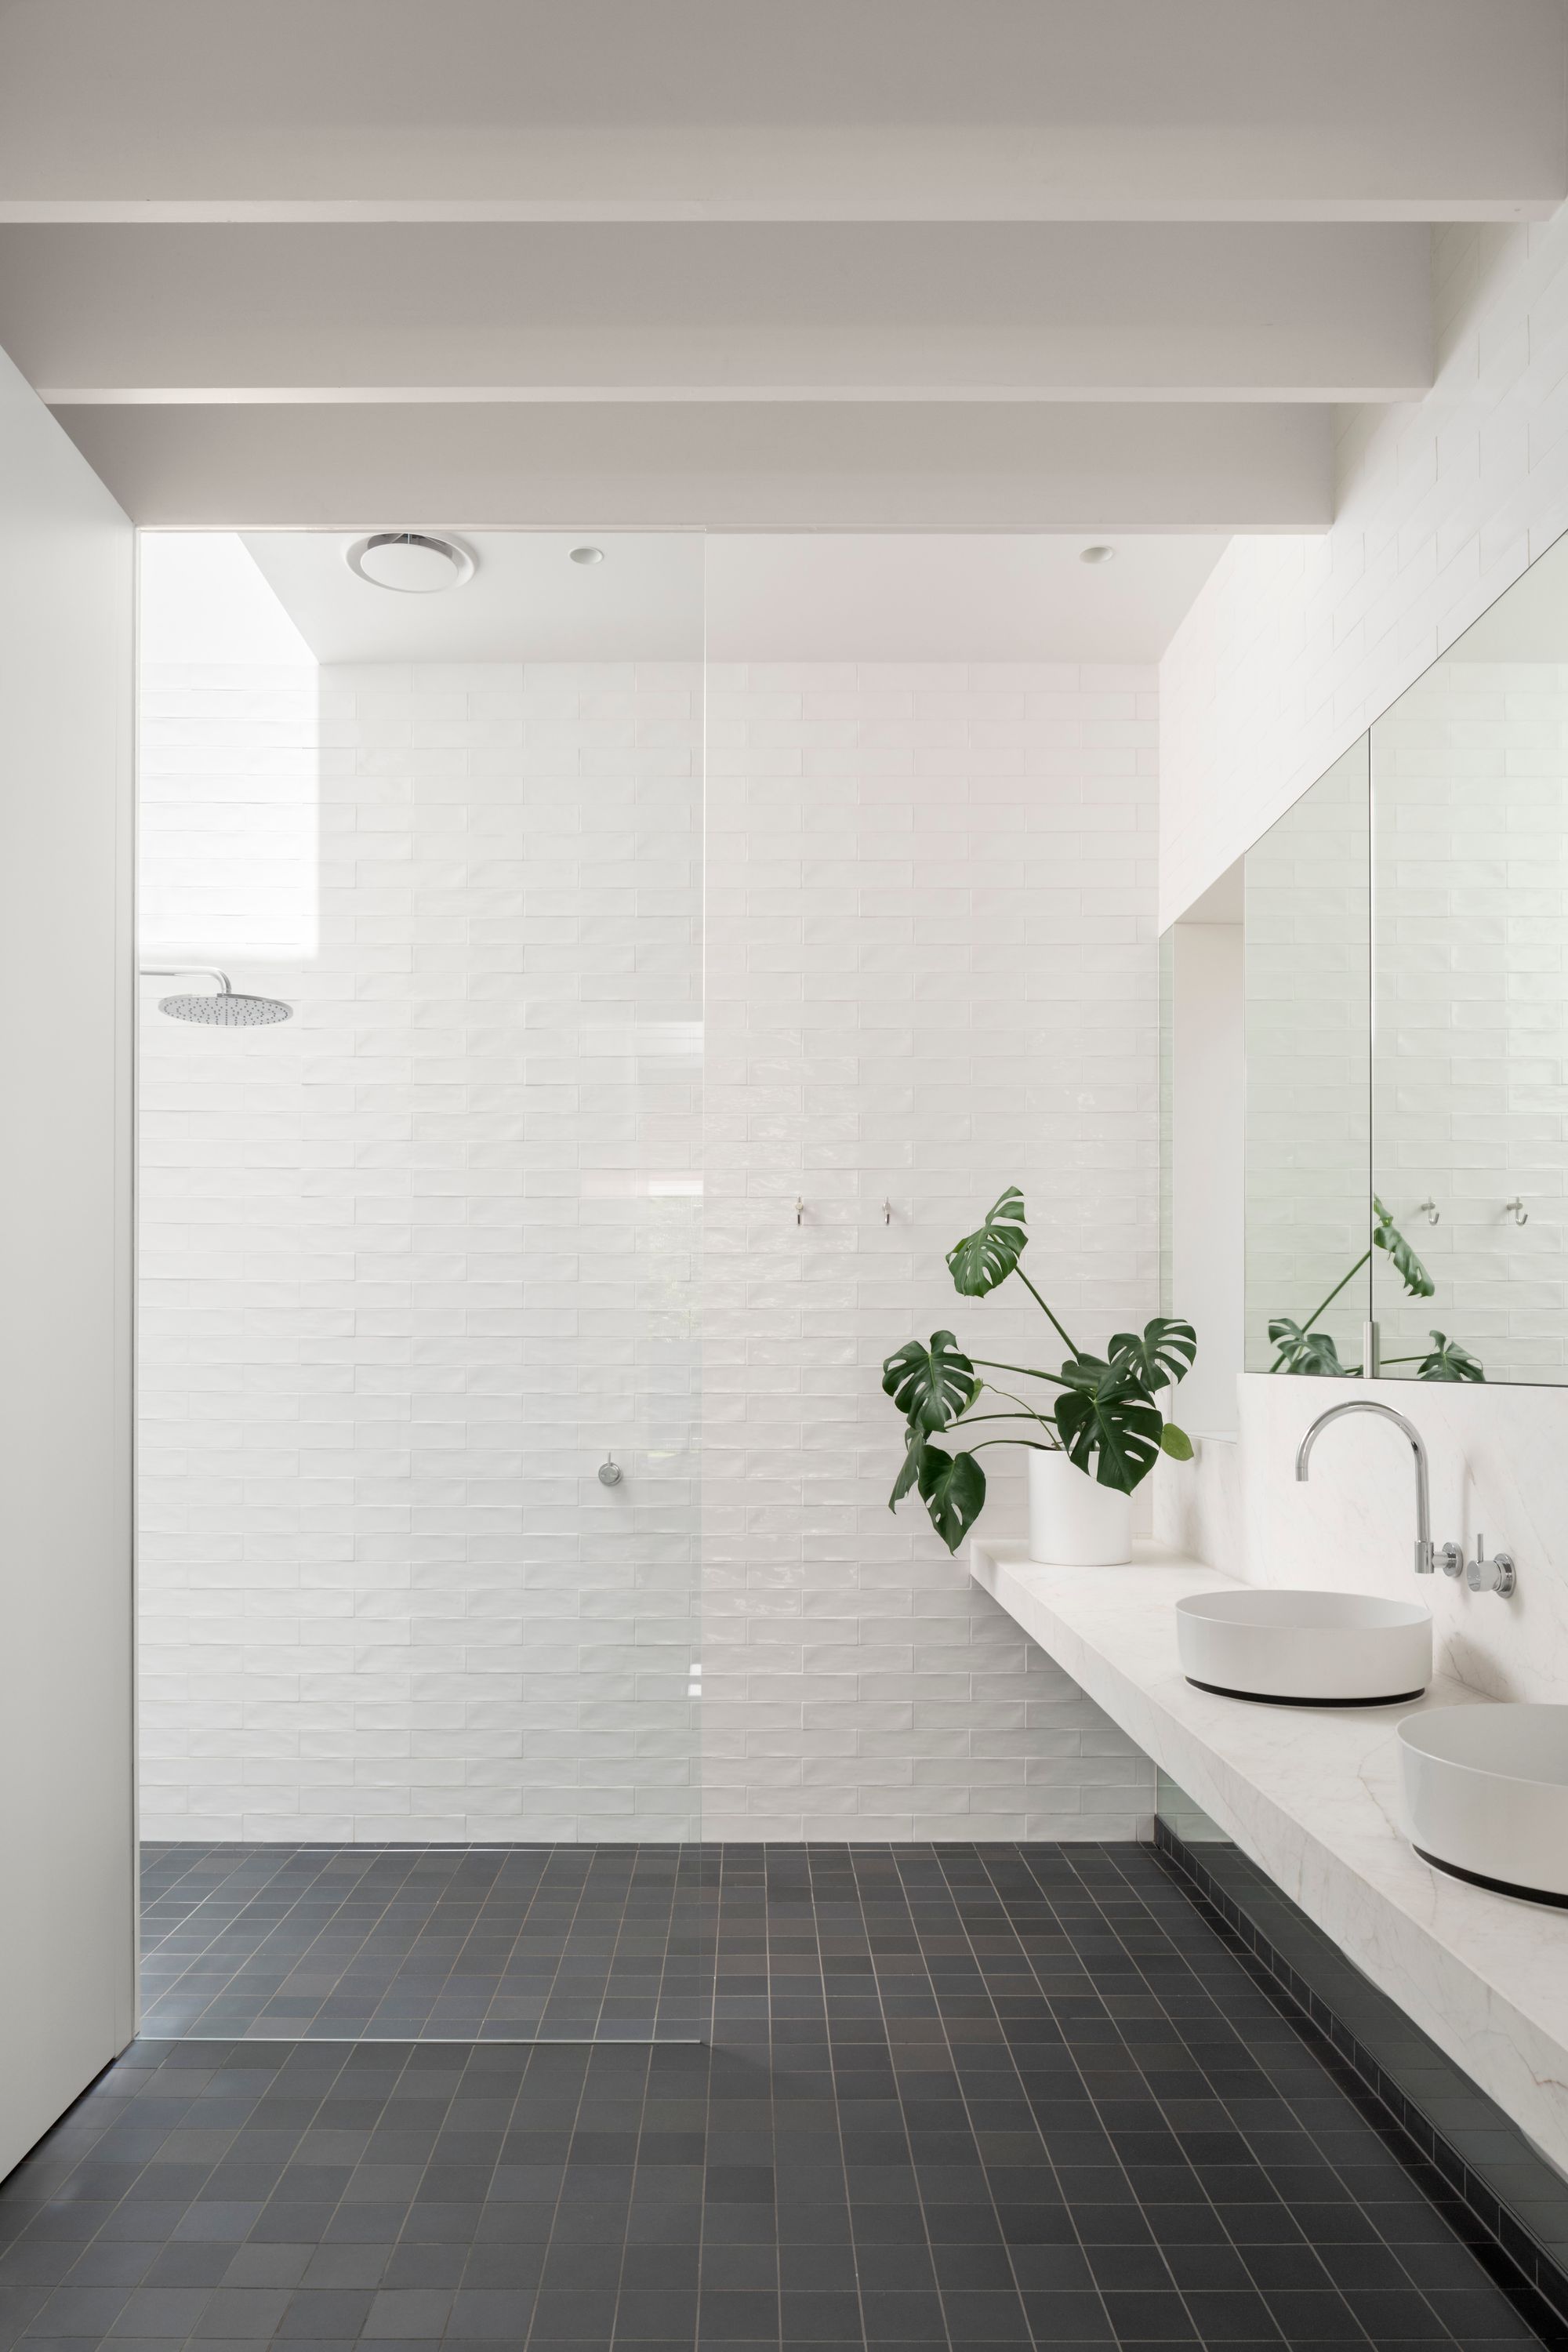 Elwood House by AM Architecture showing interior view of the bathroom with white and grey tiles